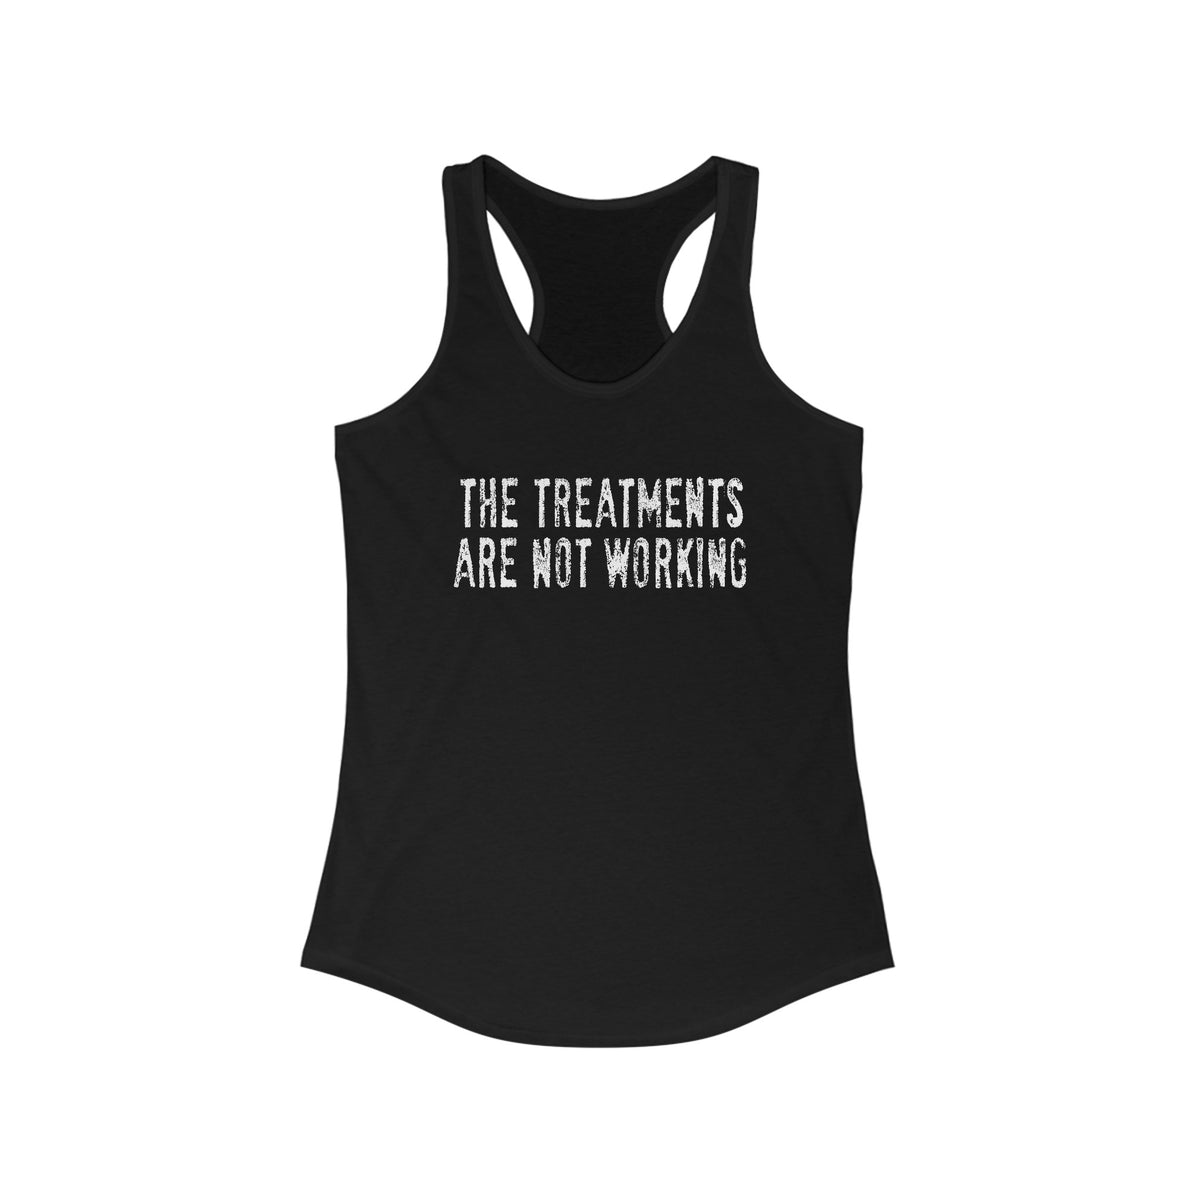 The Treatments Are Not Working  - Women's Racerback Tank